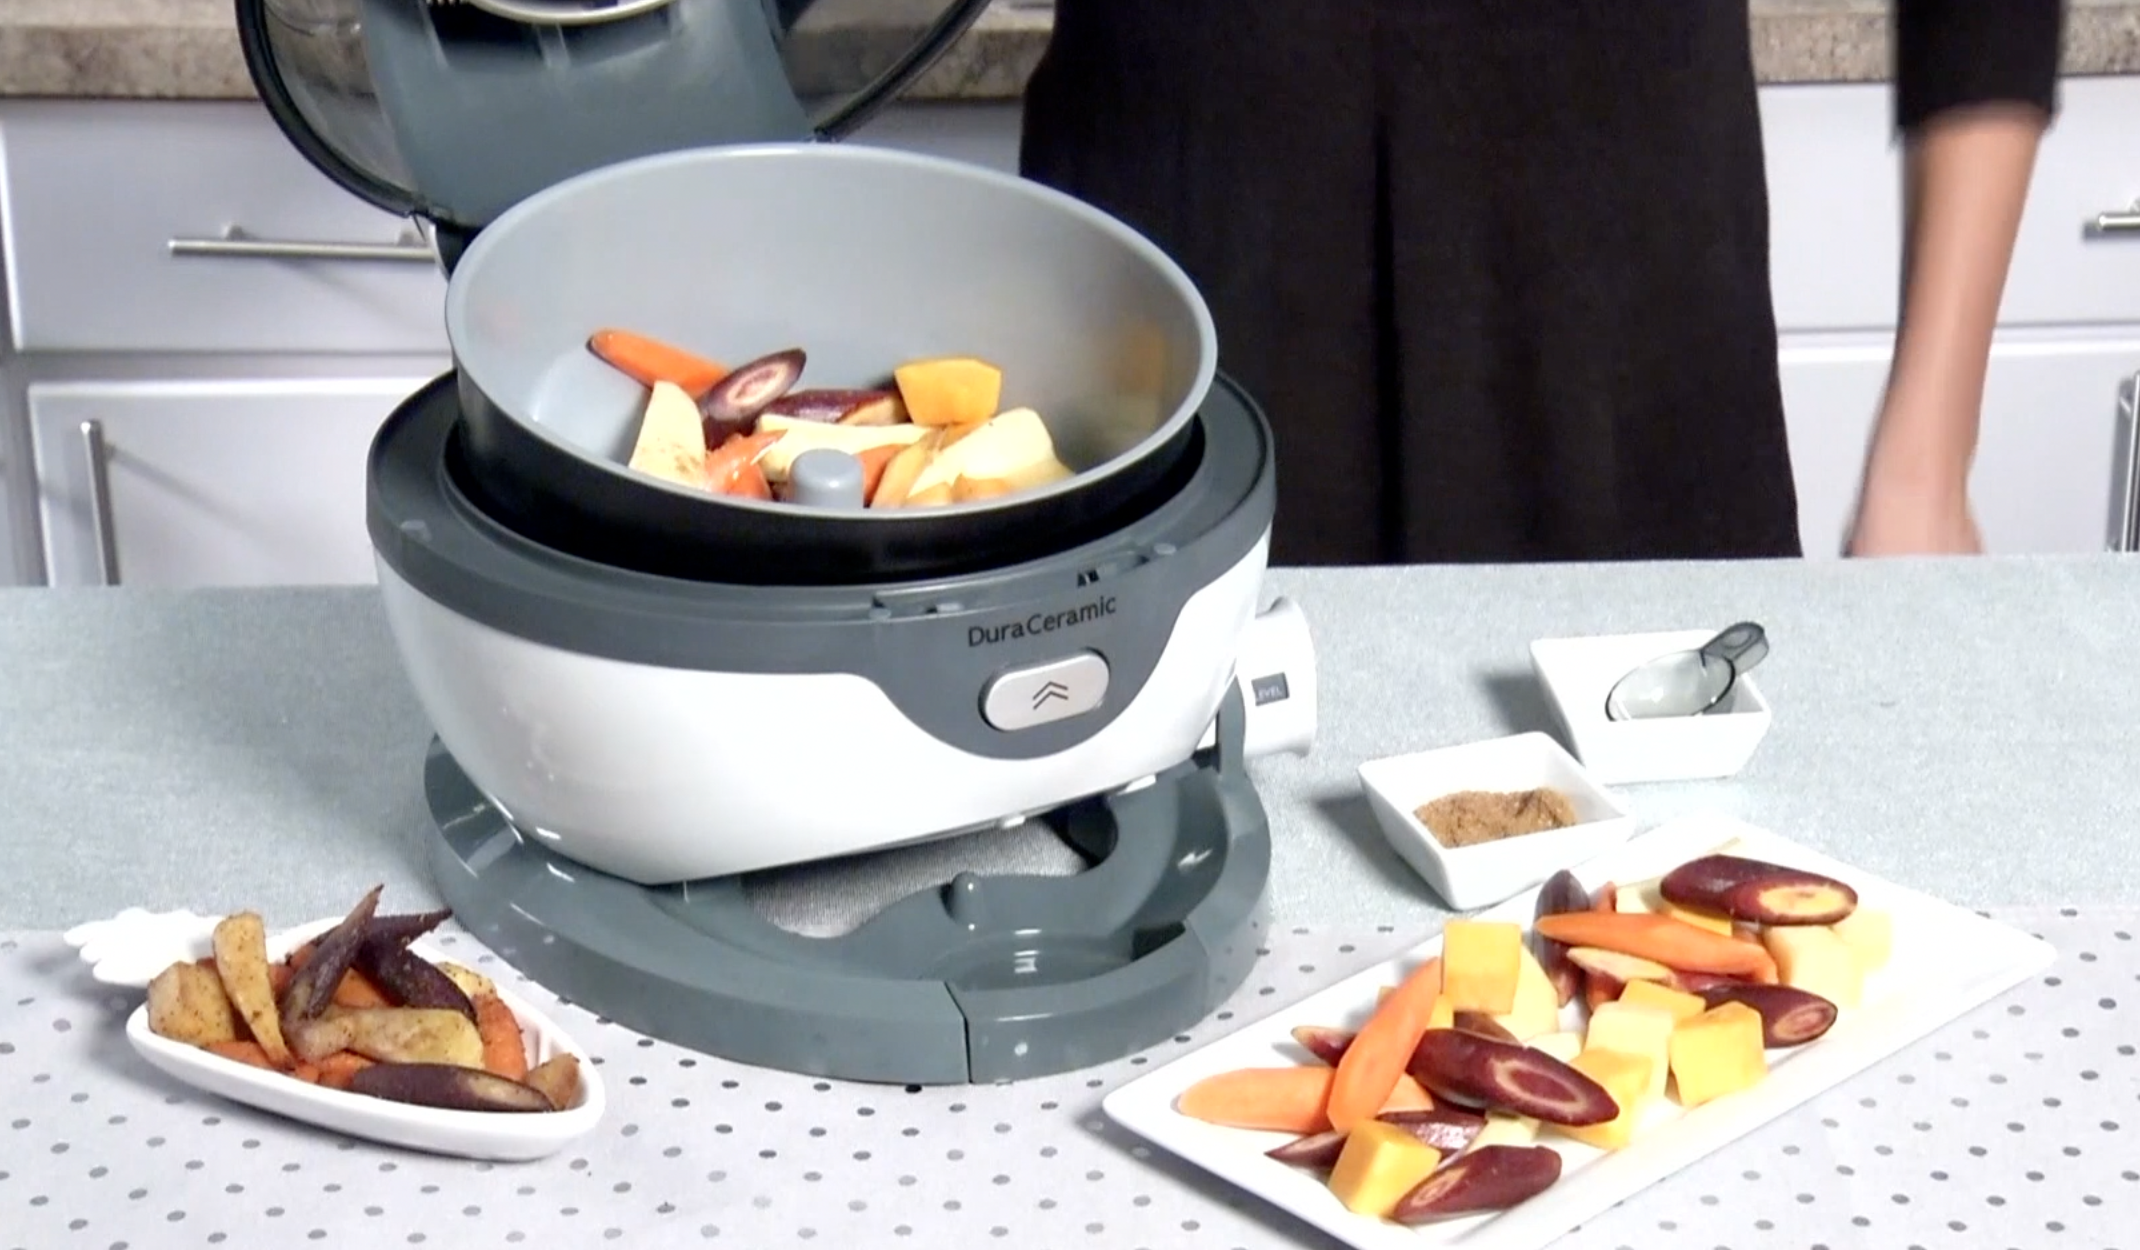 Cooking Healthier With an Air Fryer